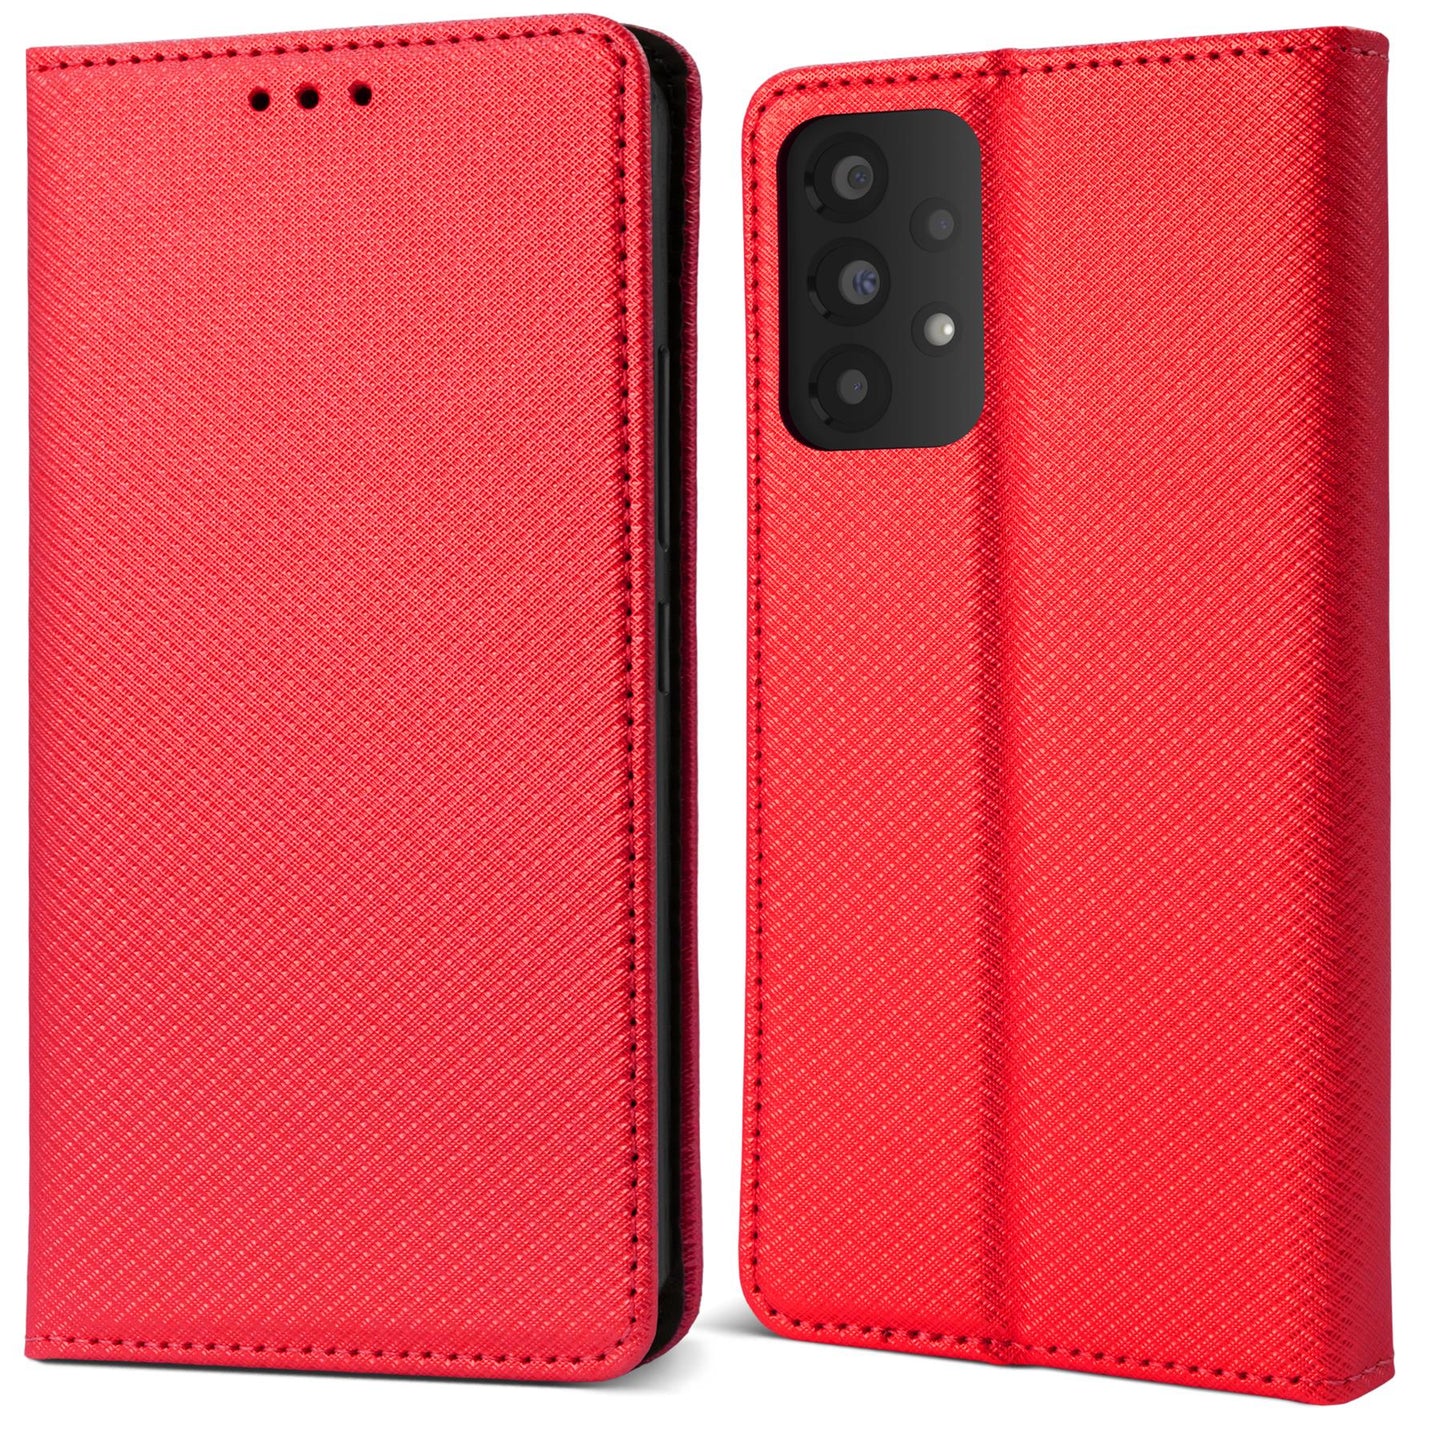 Moozy Case Flip Cover for Samsung A53 5G, Red - Smart Magnetic Flip Case Flip Folio Wallet Case with Card Holder and Stand, Credit Card Slots, Kickstand Function